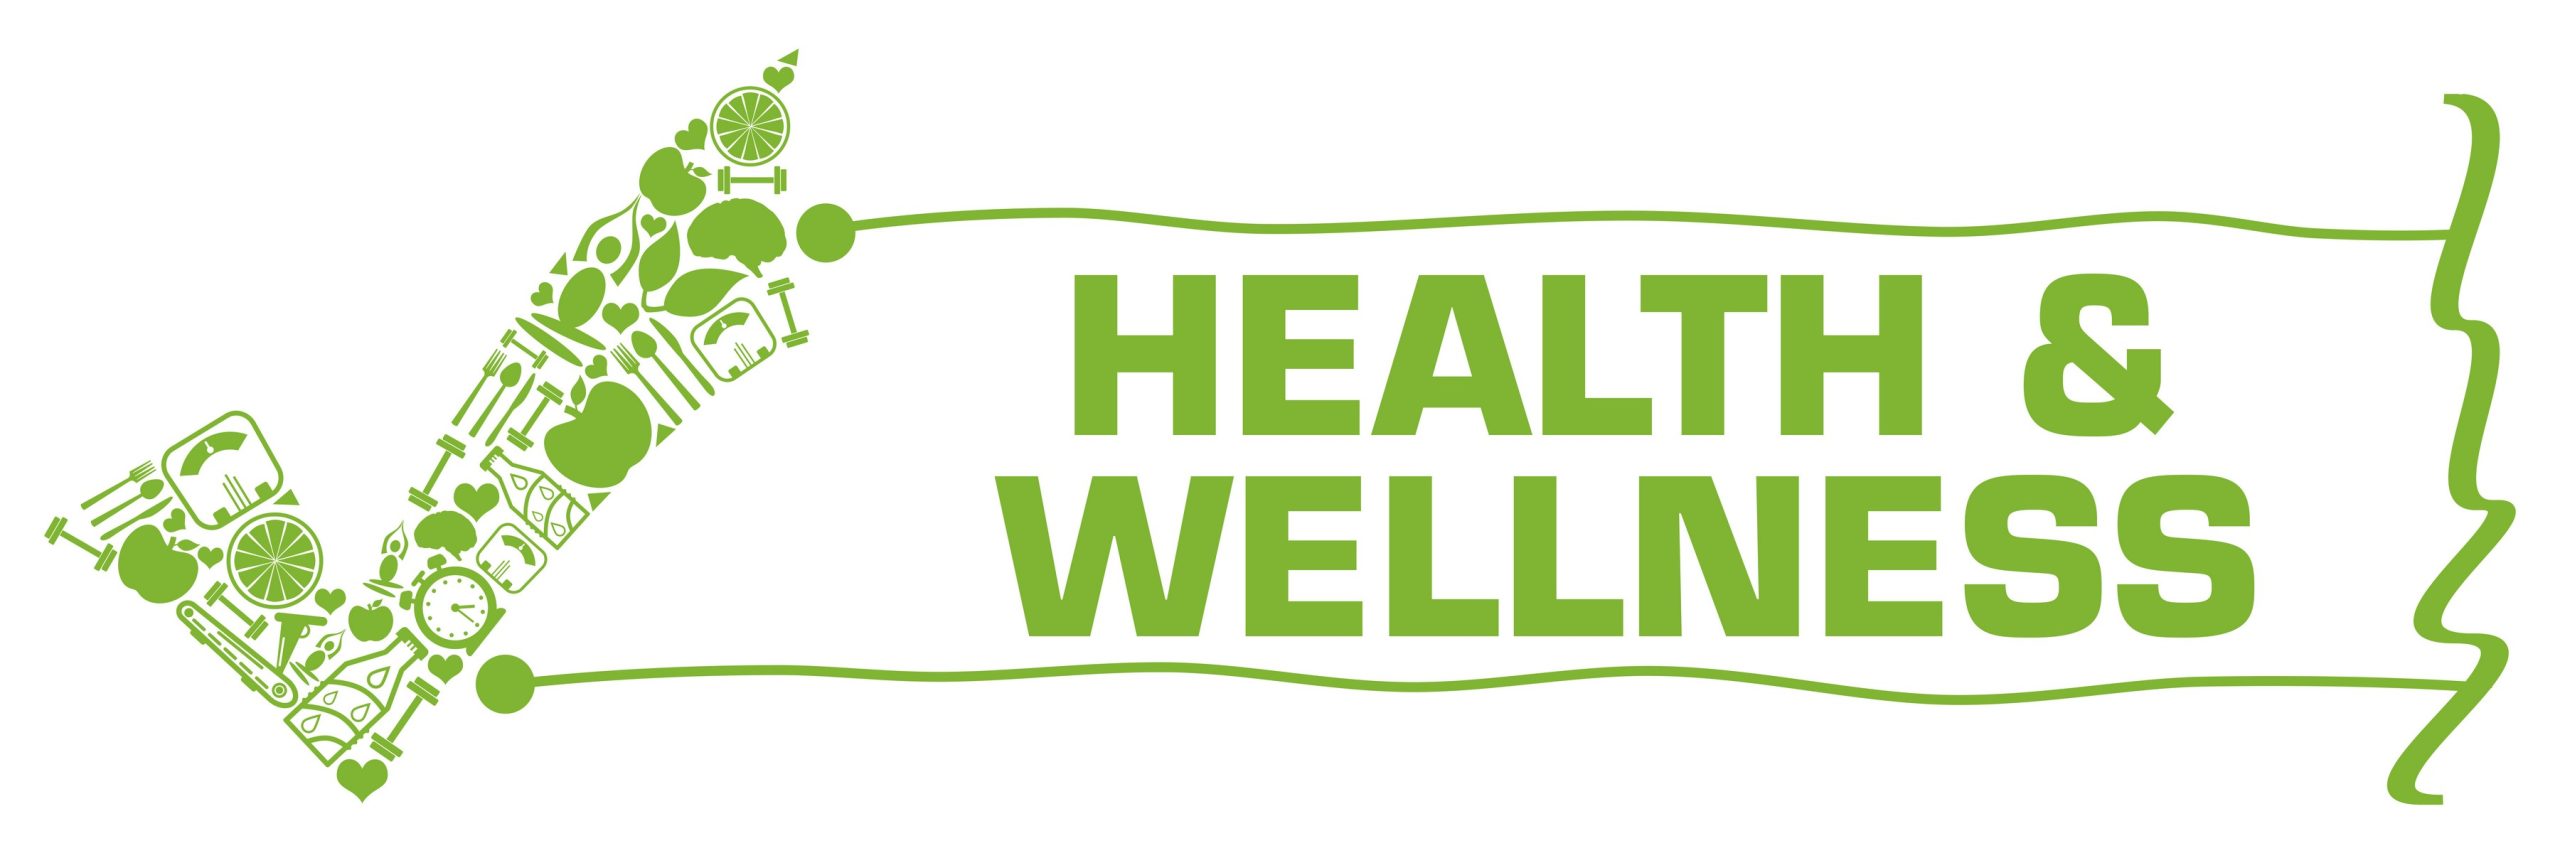 Healthy Vending Alamo Heights | Workplace Wellness | Healthy Employees